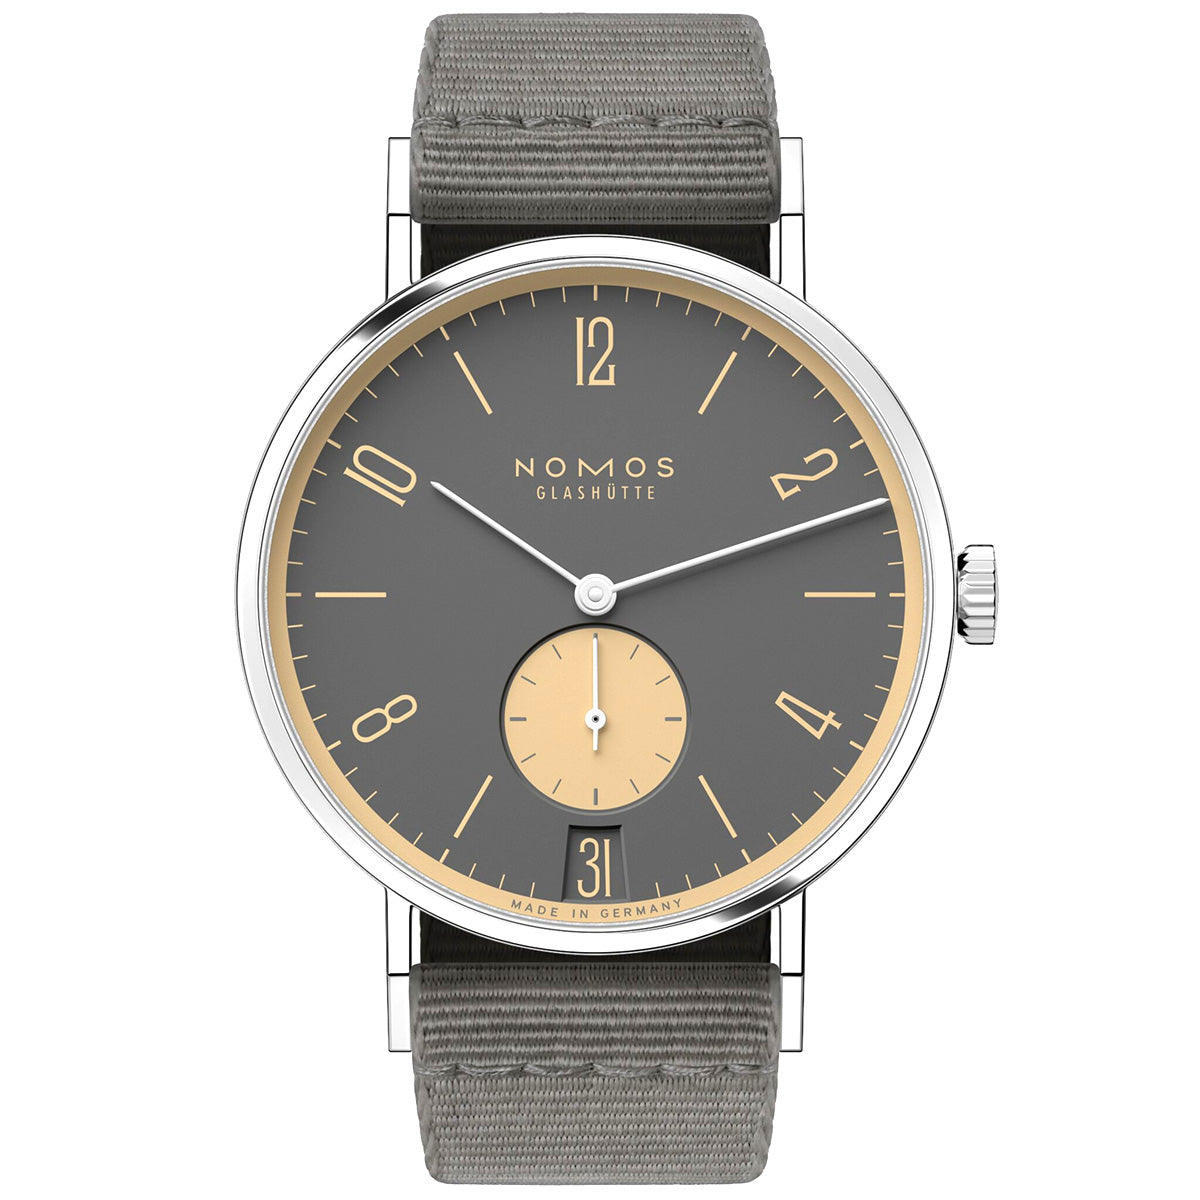 Tangente 38mm 'Haifischgrau' Limited Edition Watch